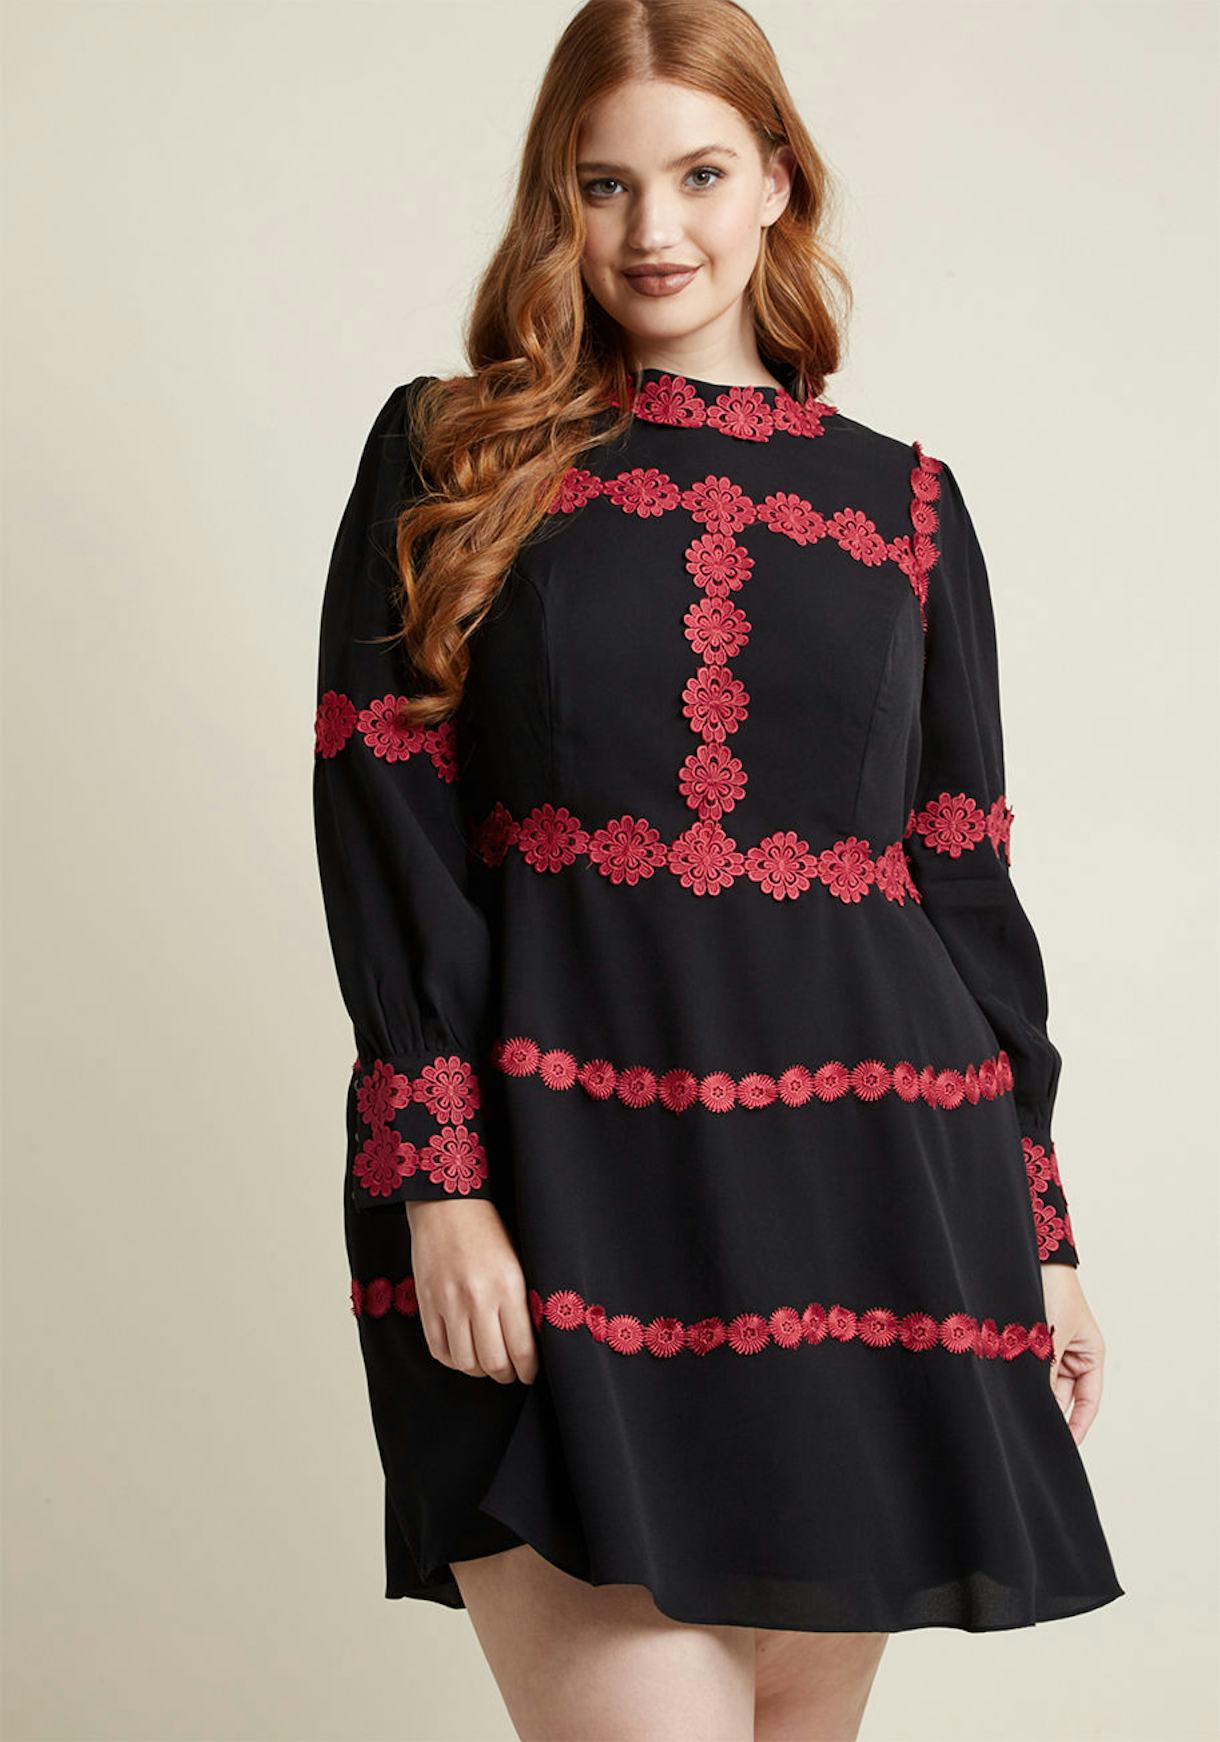 57 Plus-Size Holiday Dresses That Will Make You Look Forward To Seeing ...